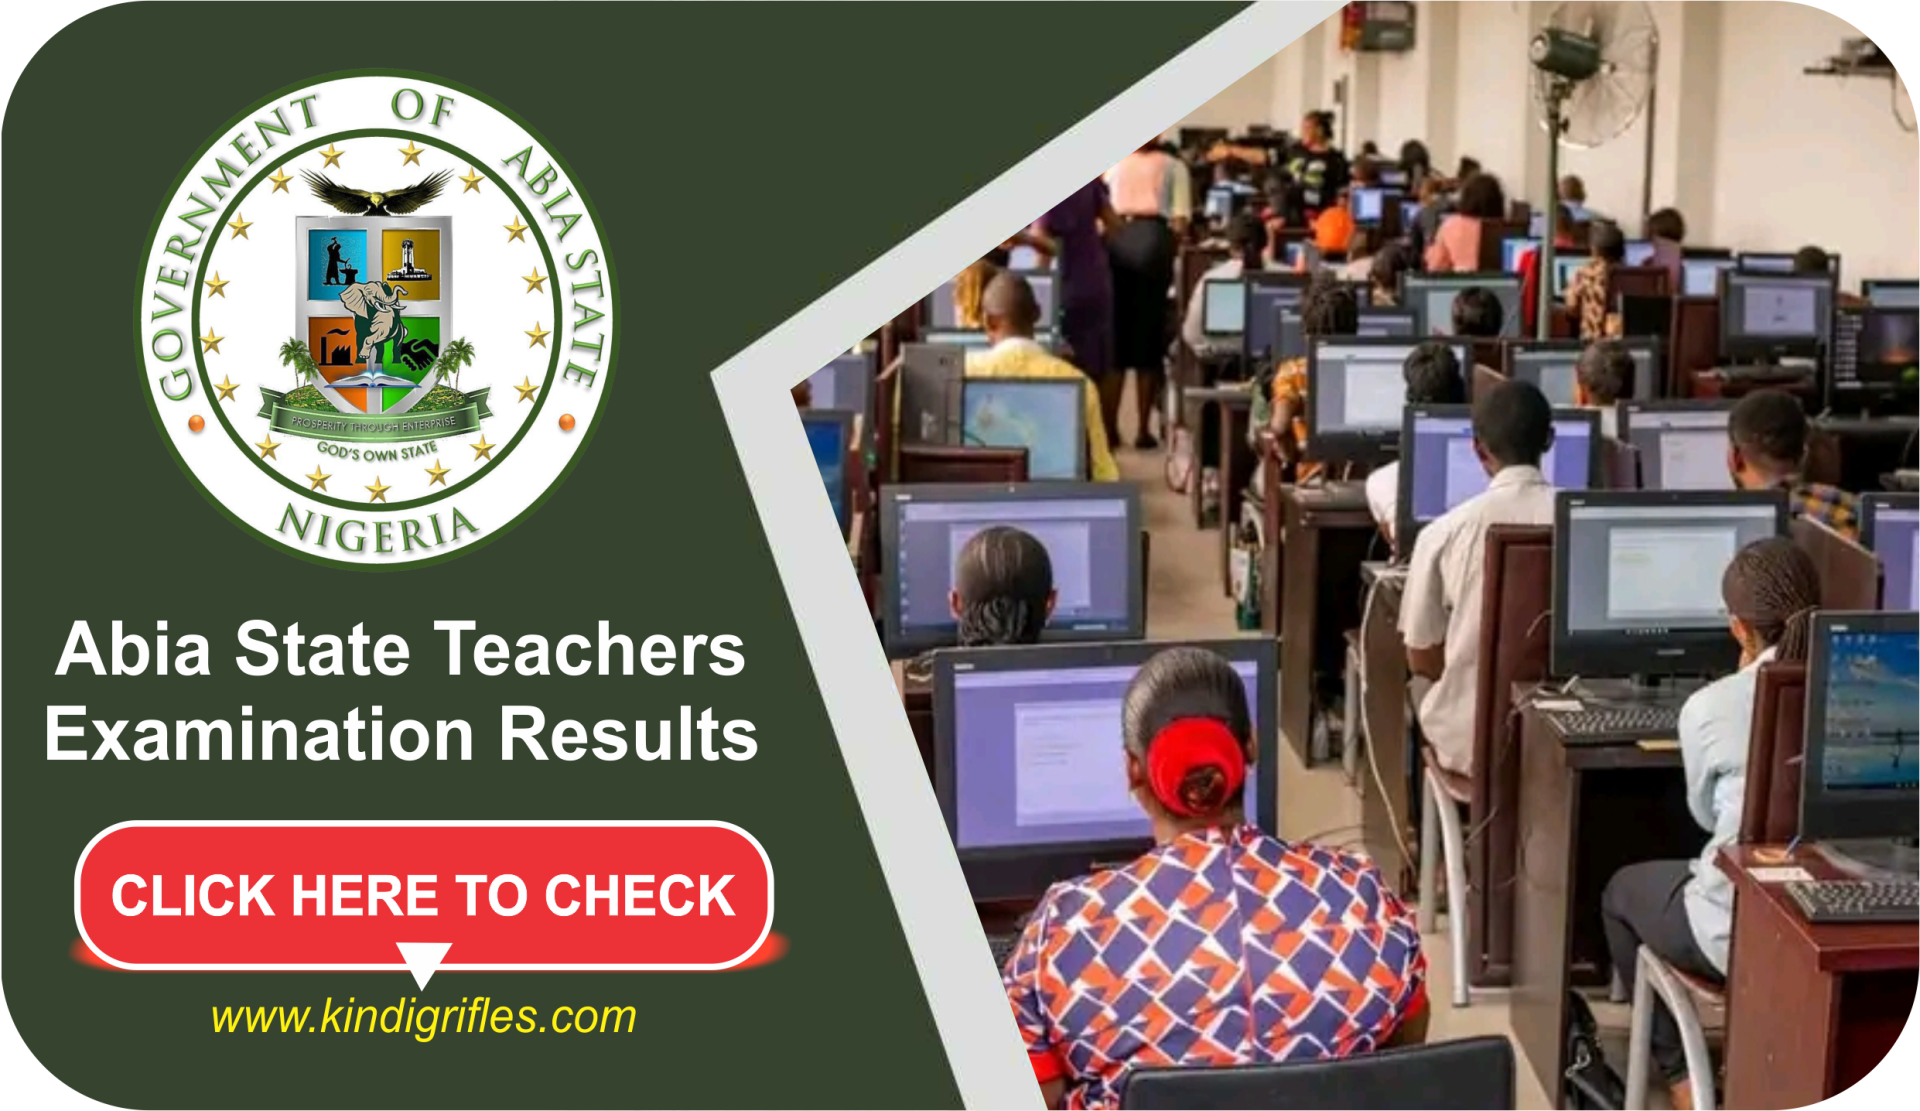 Abia State Teachers Examination Results